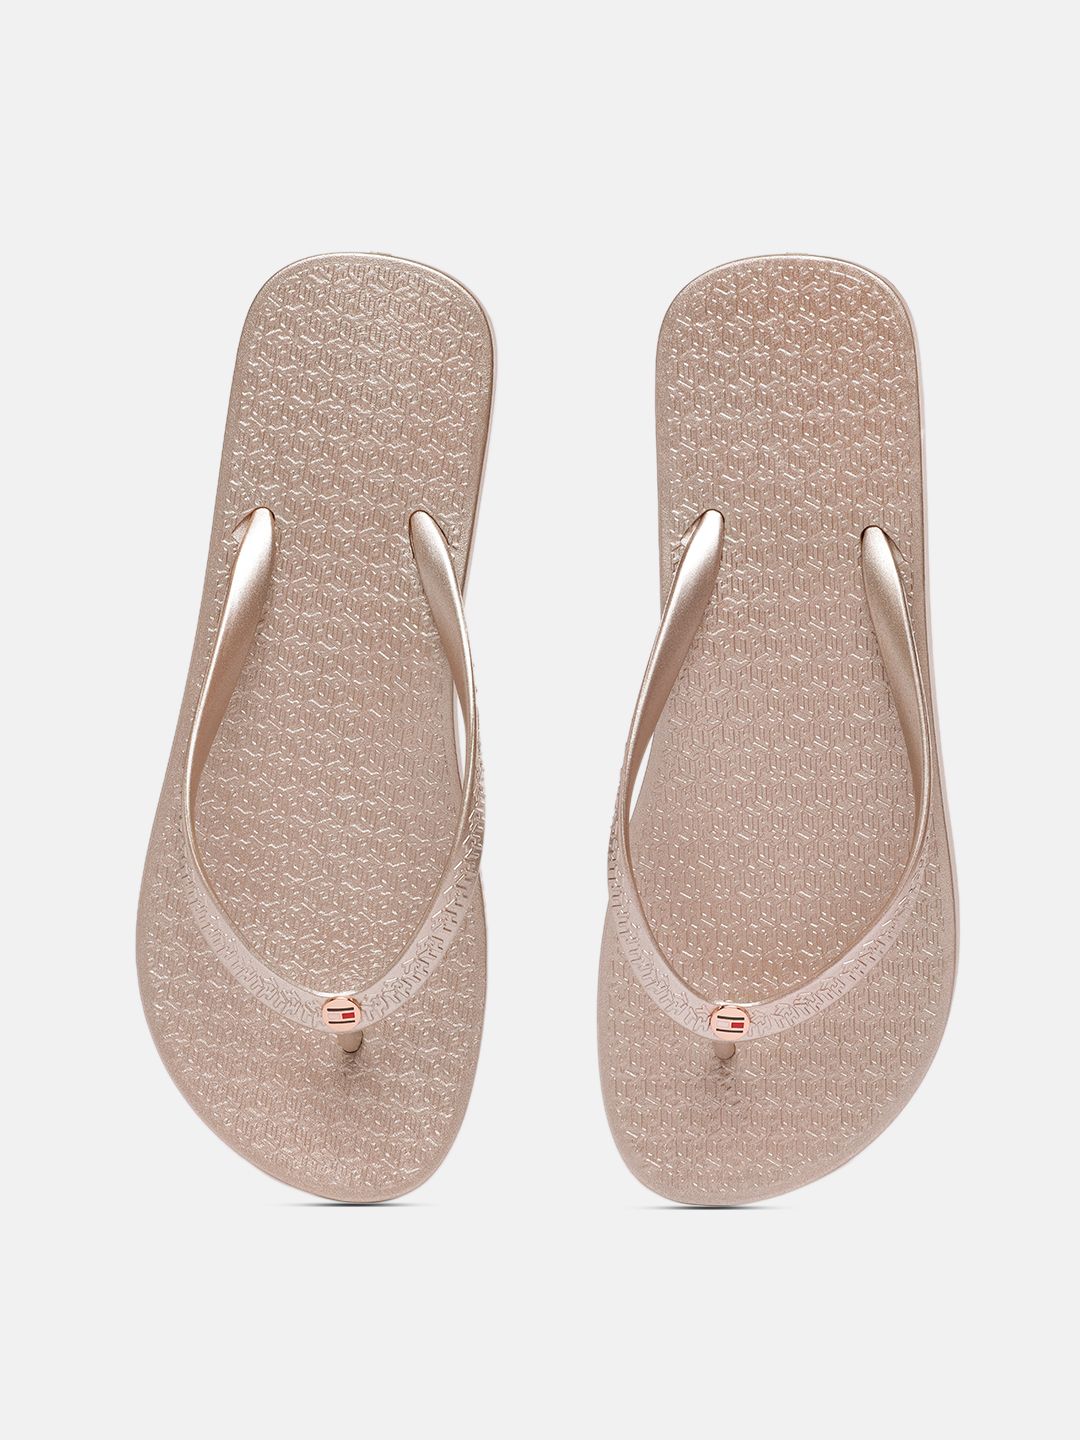 Tommy Hilfiger Women Champagne Brand Logo Printed Thong Flip-Flops With Metallic Finish Price in India